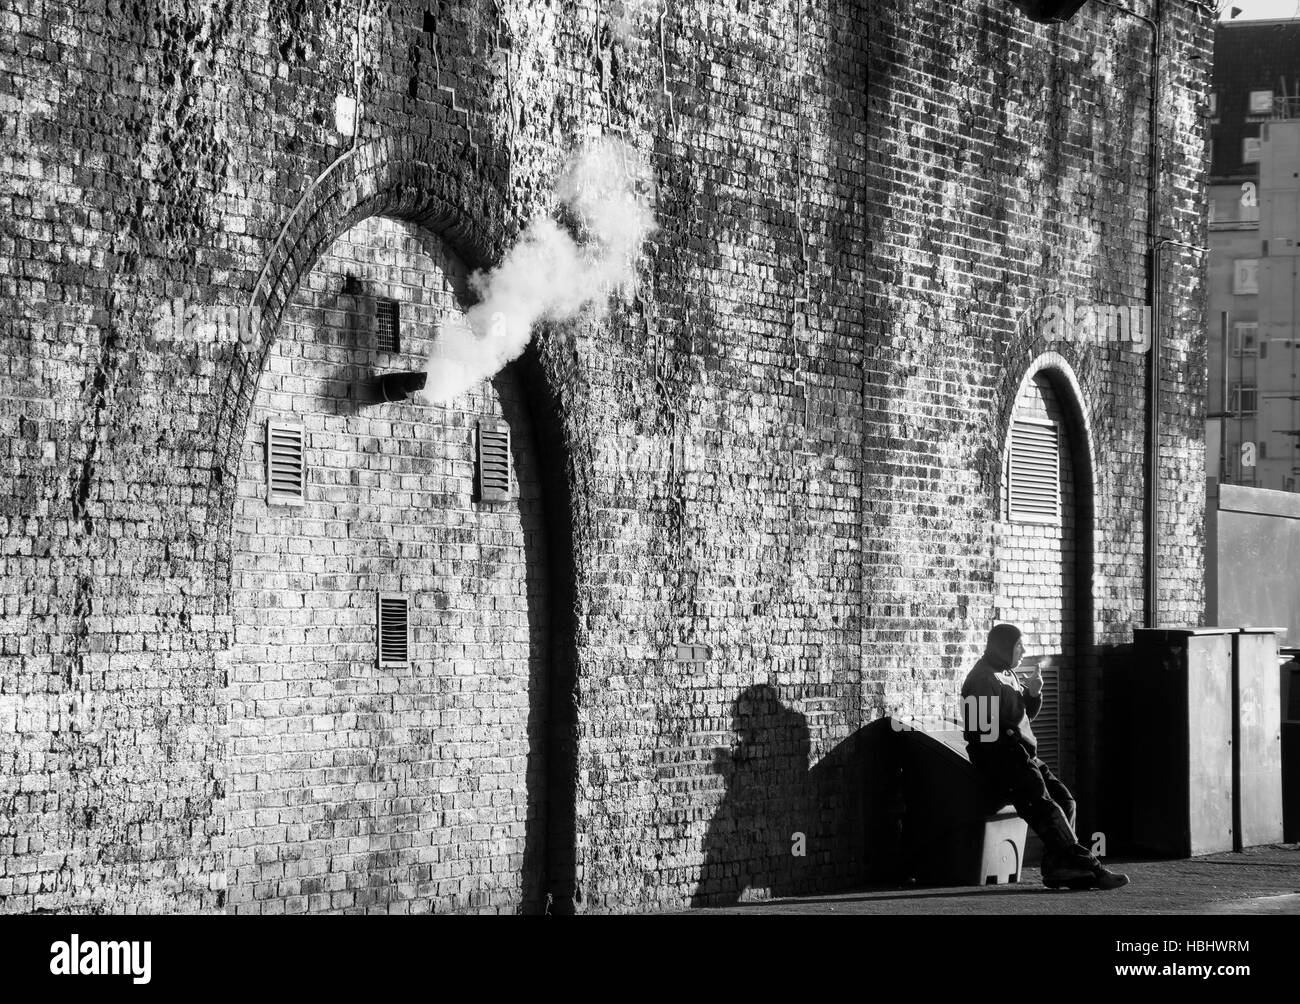 Homme assis sous les arches, fumeurs Waterloo, London Borough of Lambeth, Greater London, Angleterre, Royaume-Uni Banque D'Images